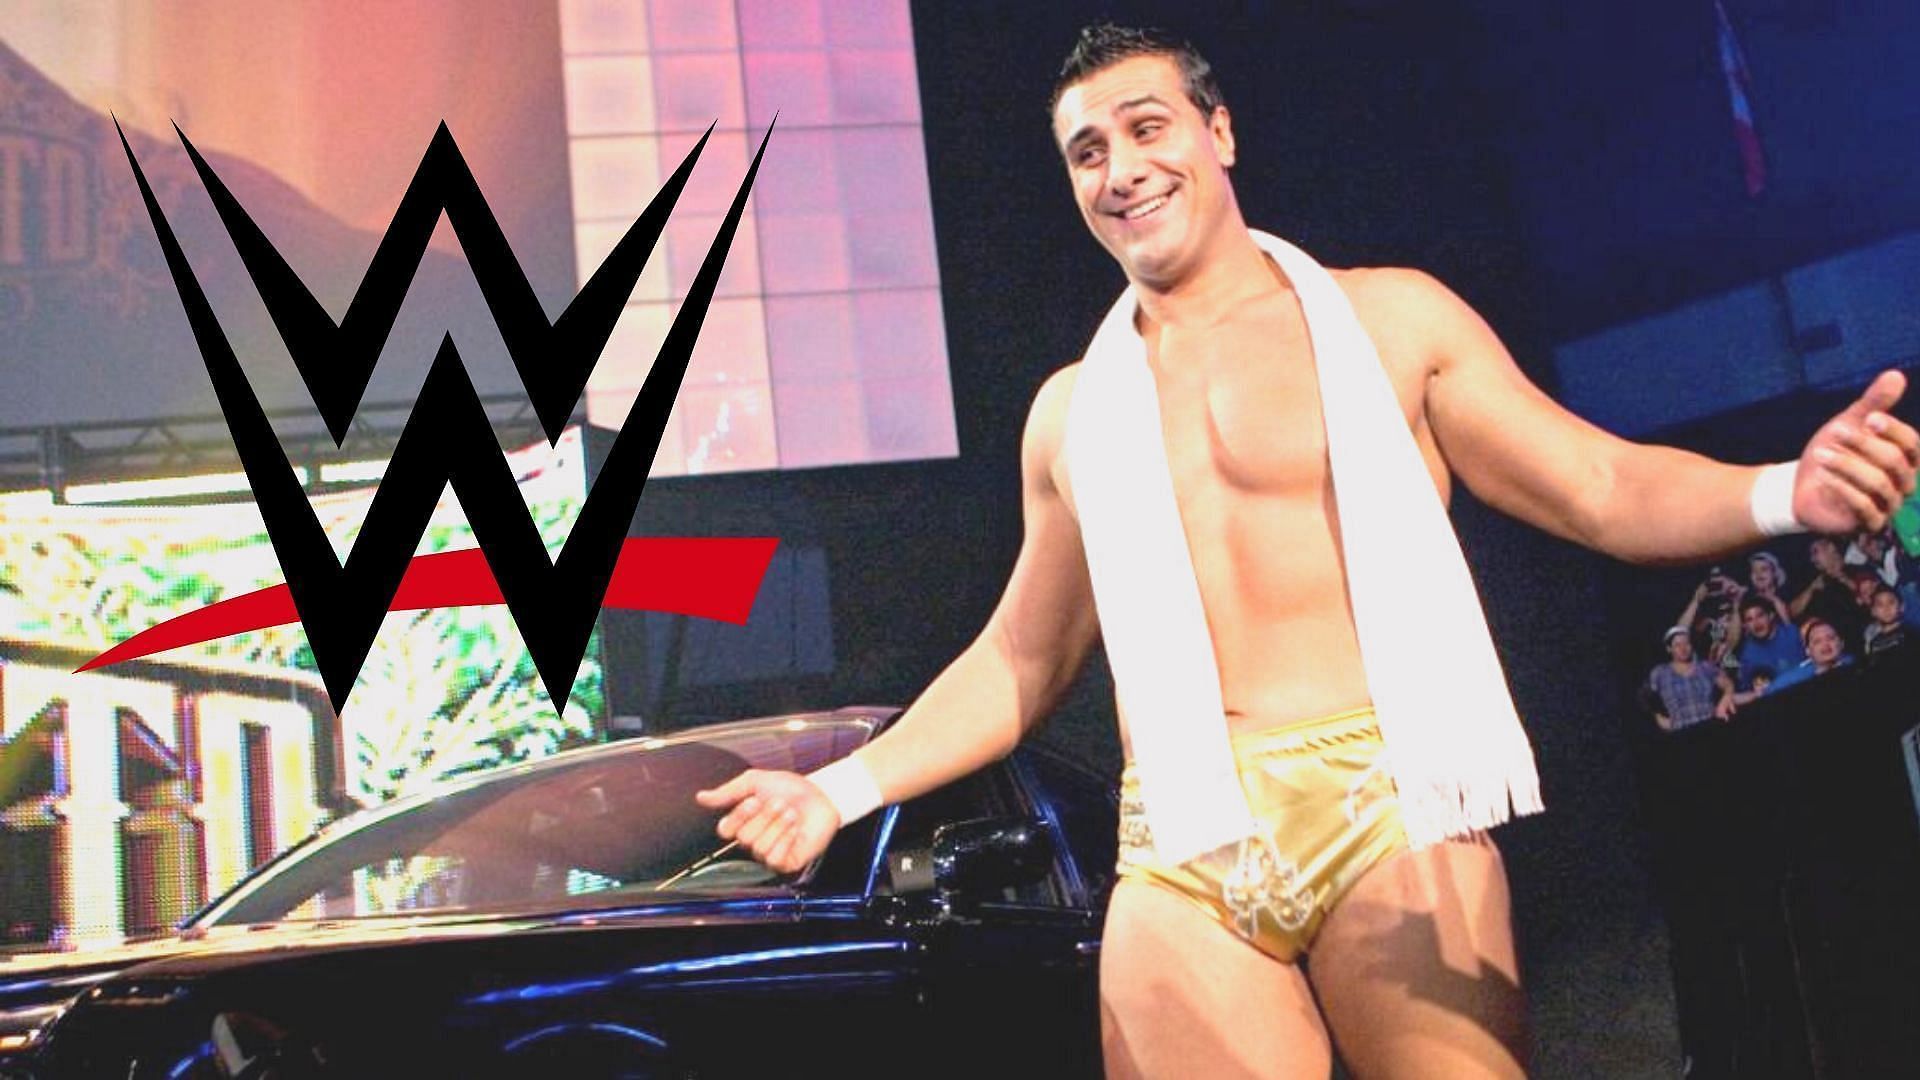 Could we see the return of Alberto Del Rio to WWE? Only time will tell.